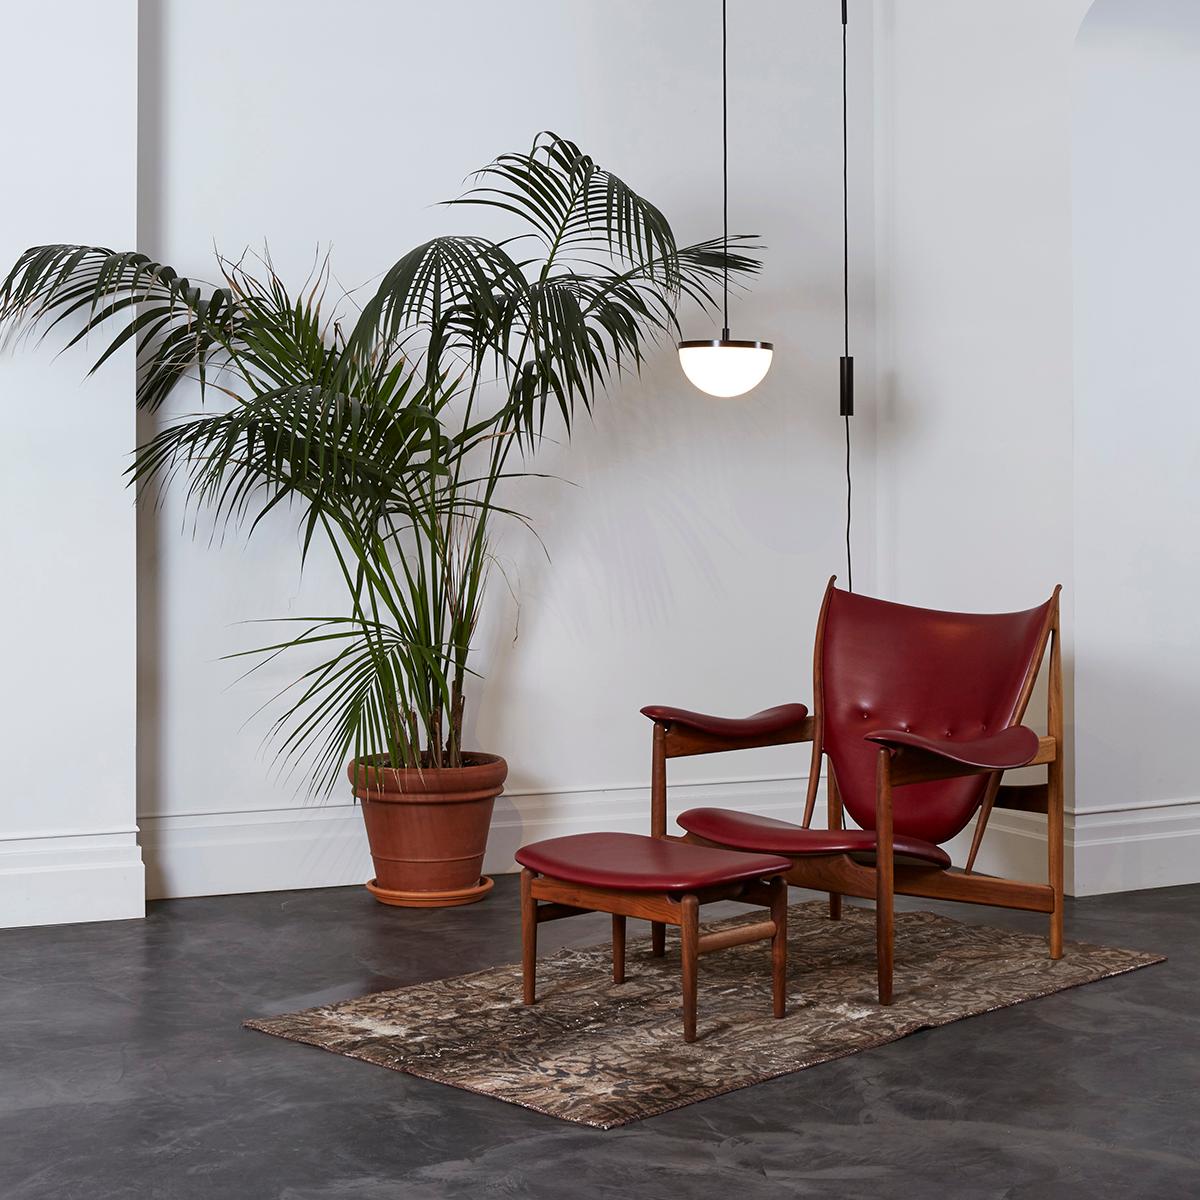 Set of Chieftain Sofa Couch and Chieftain Stool in Wood and Leather by Finn Juhl 4